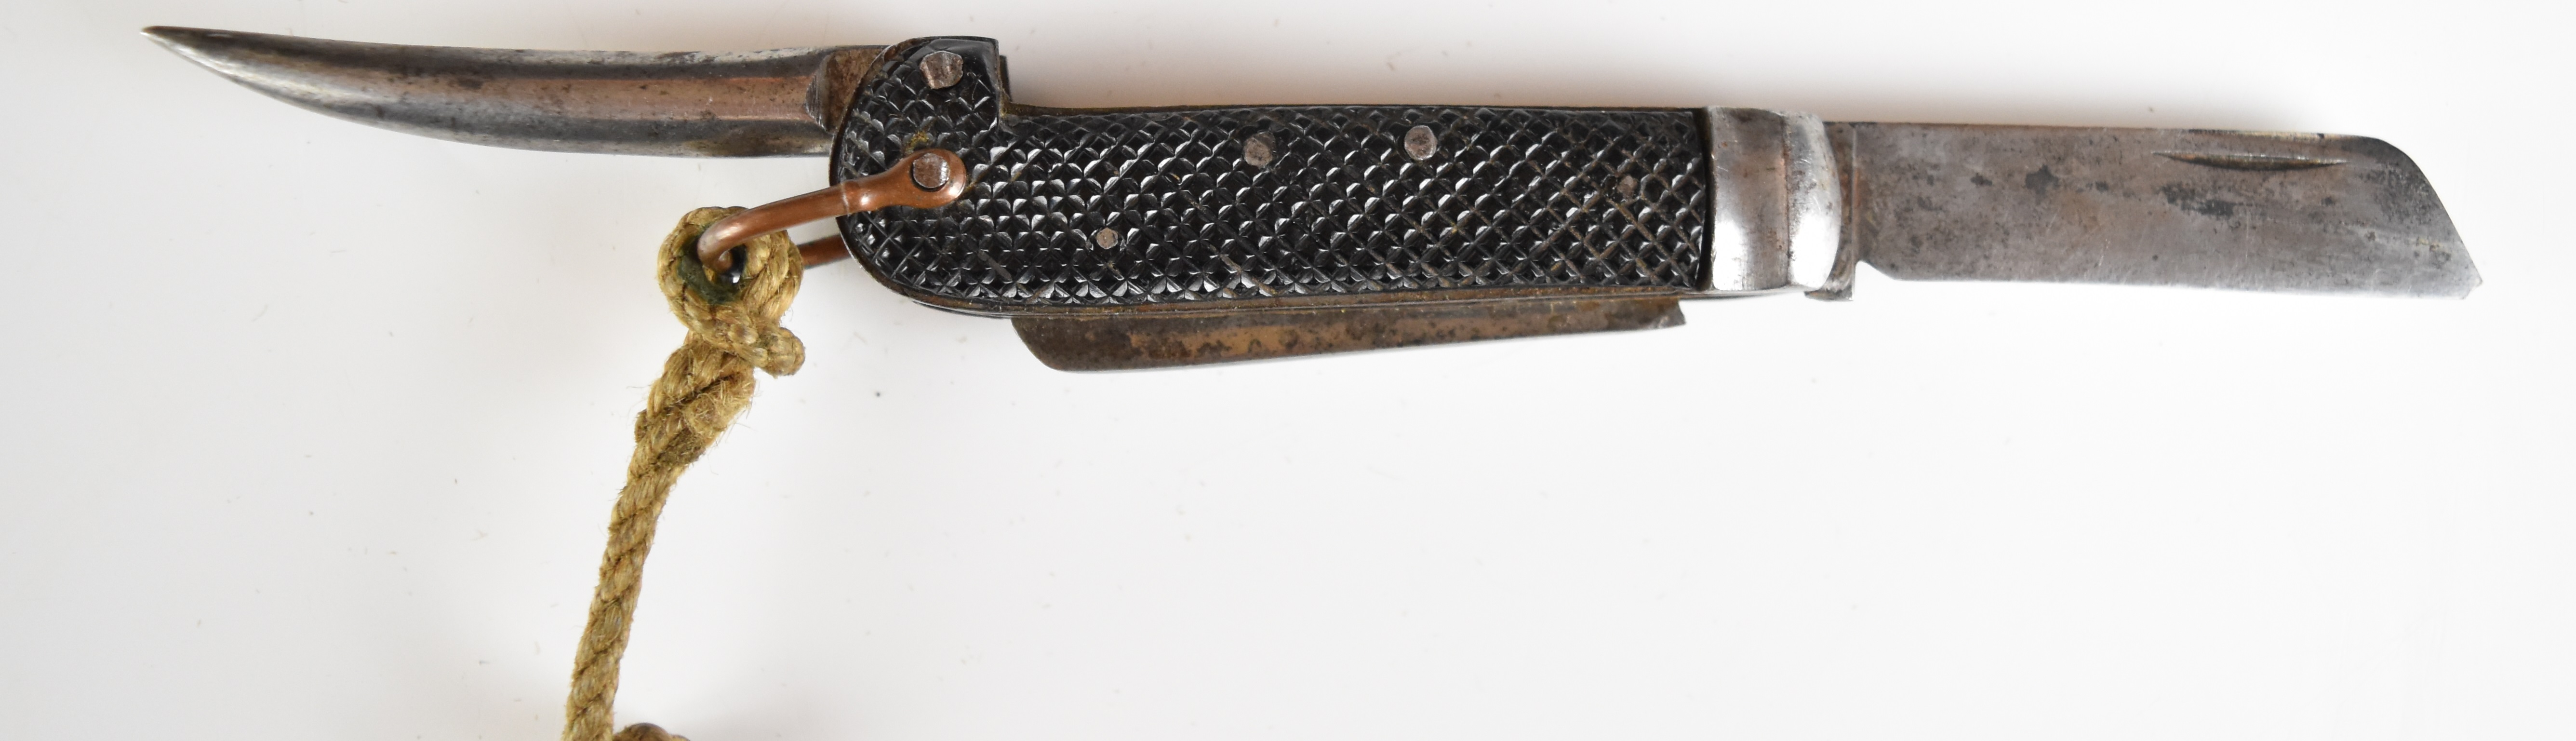 WW1 British Army clasp knife by E Tellin & Co, Sheffield, blade length 6cm, attributed to Pte - Image 2 of 6